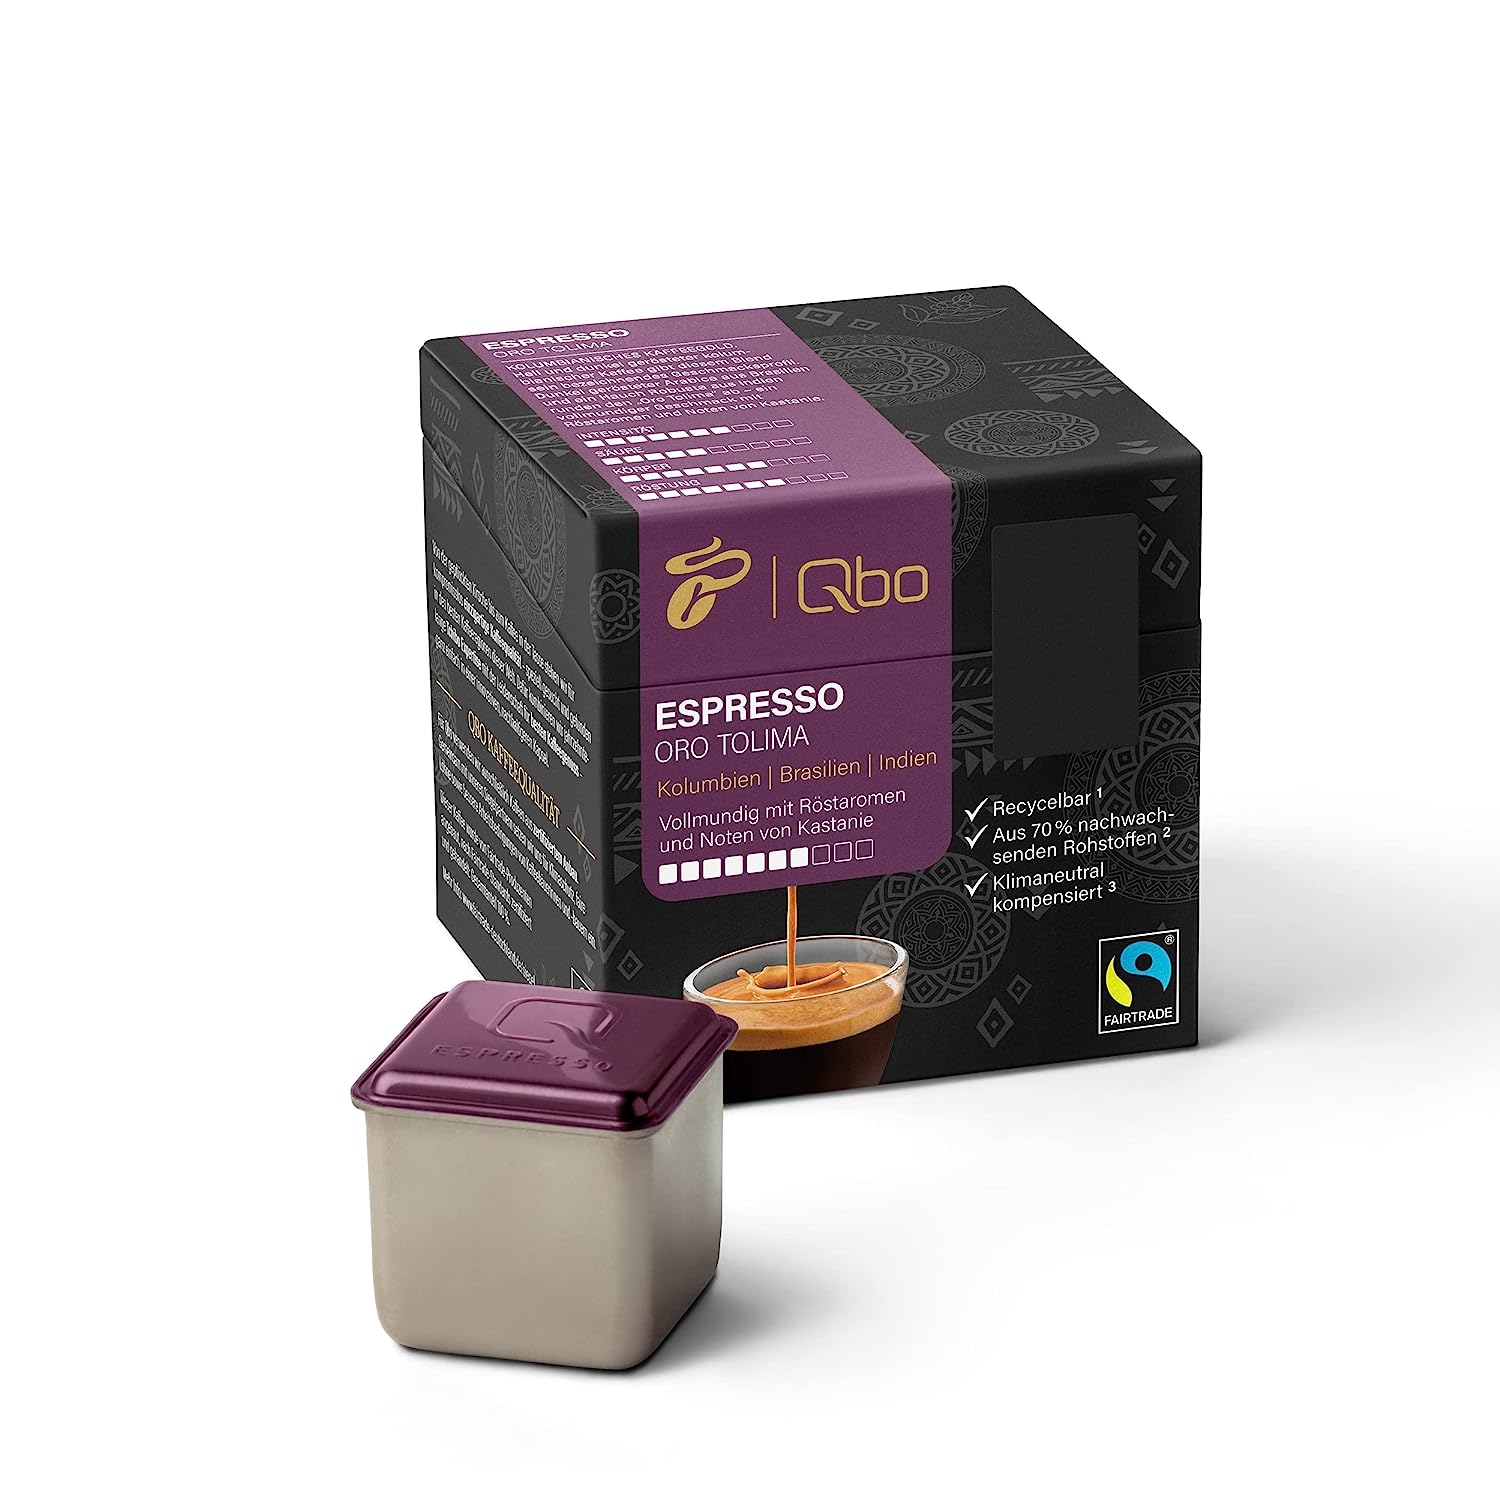 Tchibo qbo Espresso Oro Tolima Premium Coffee capsules, 8 pieces (espresso, intensity 7/10, full -bodied with roasted aromas), sustainable, from 70% renewable raw materials & climate -neutral